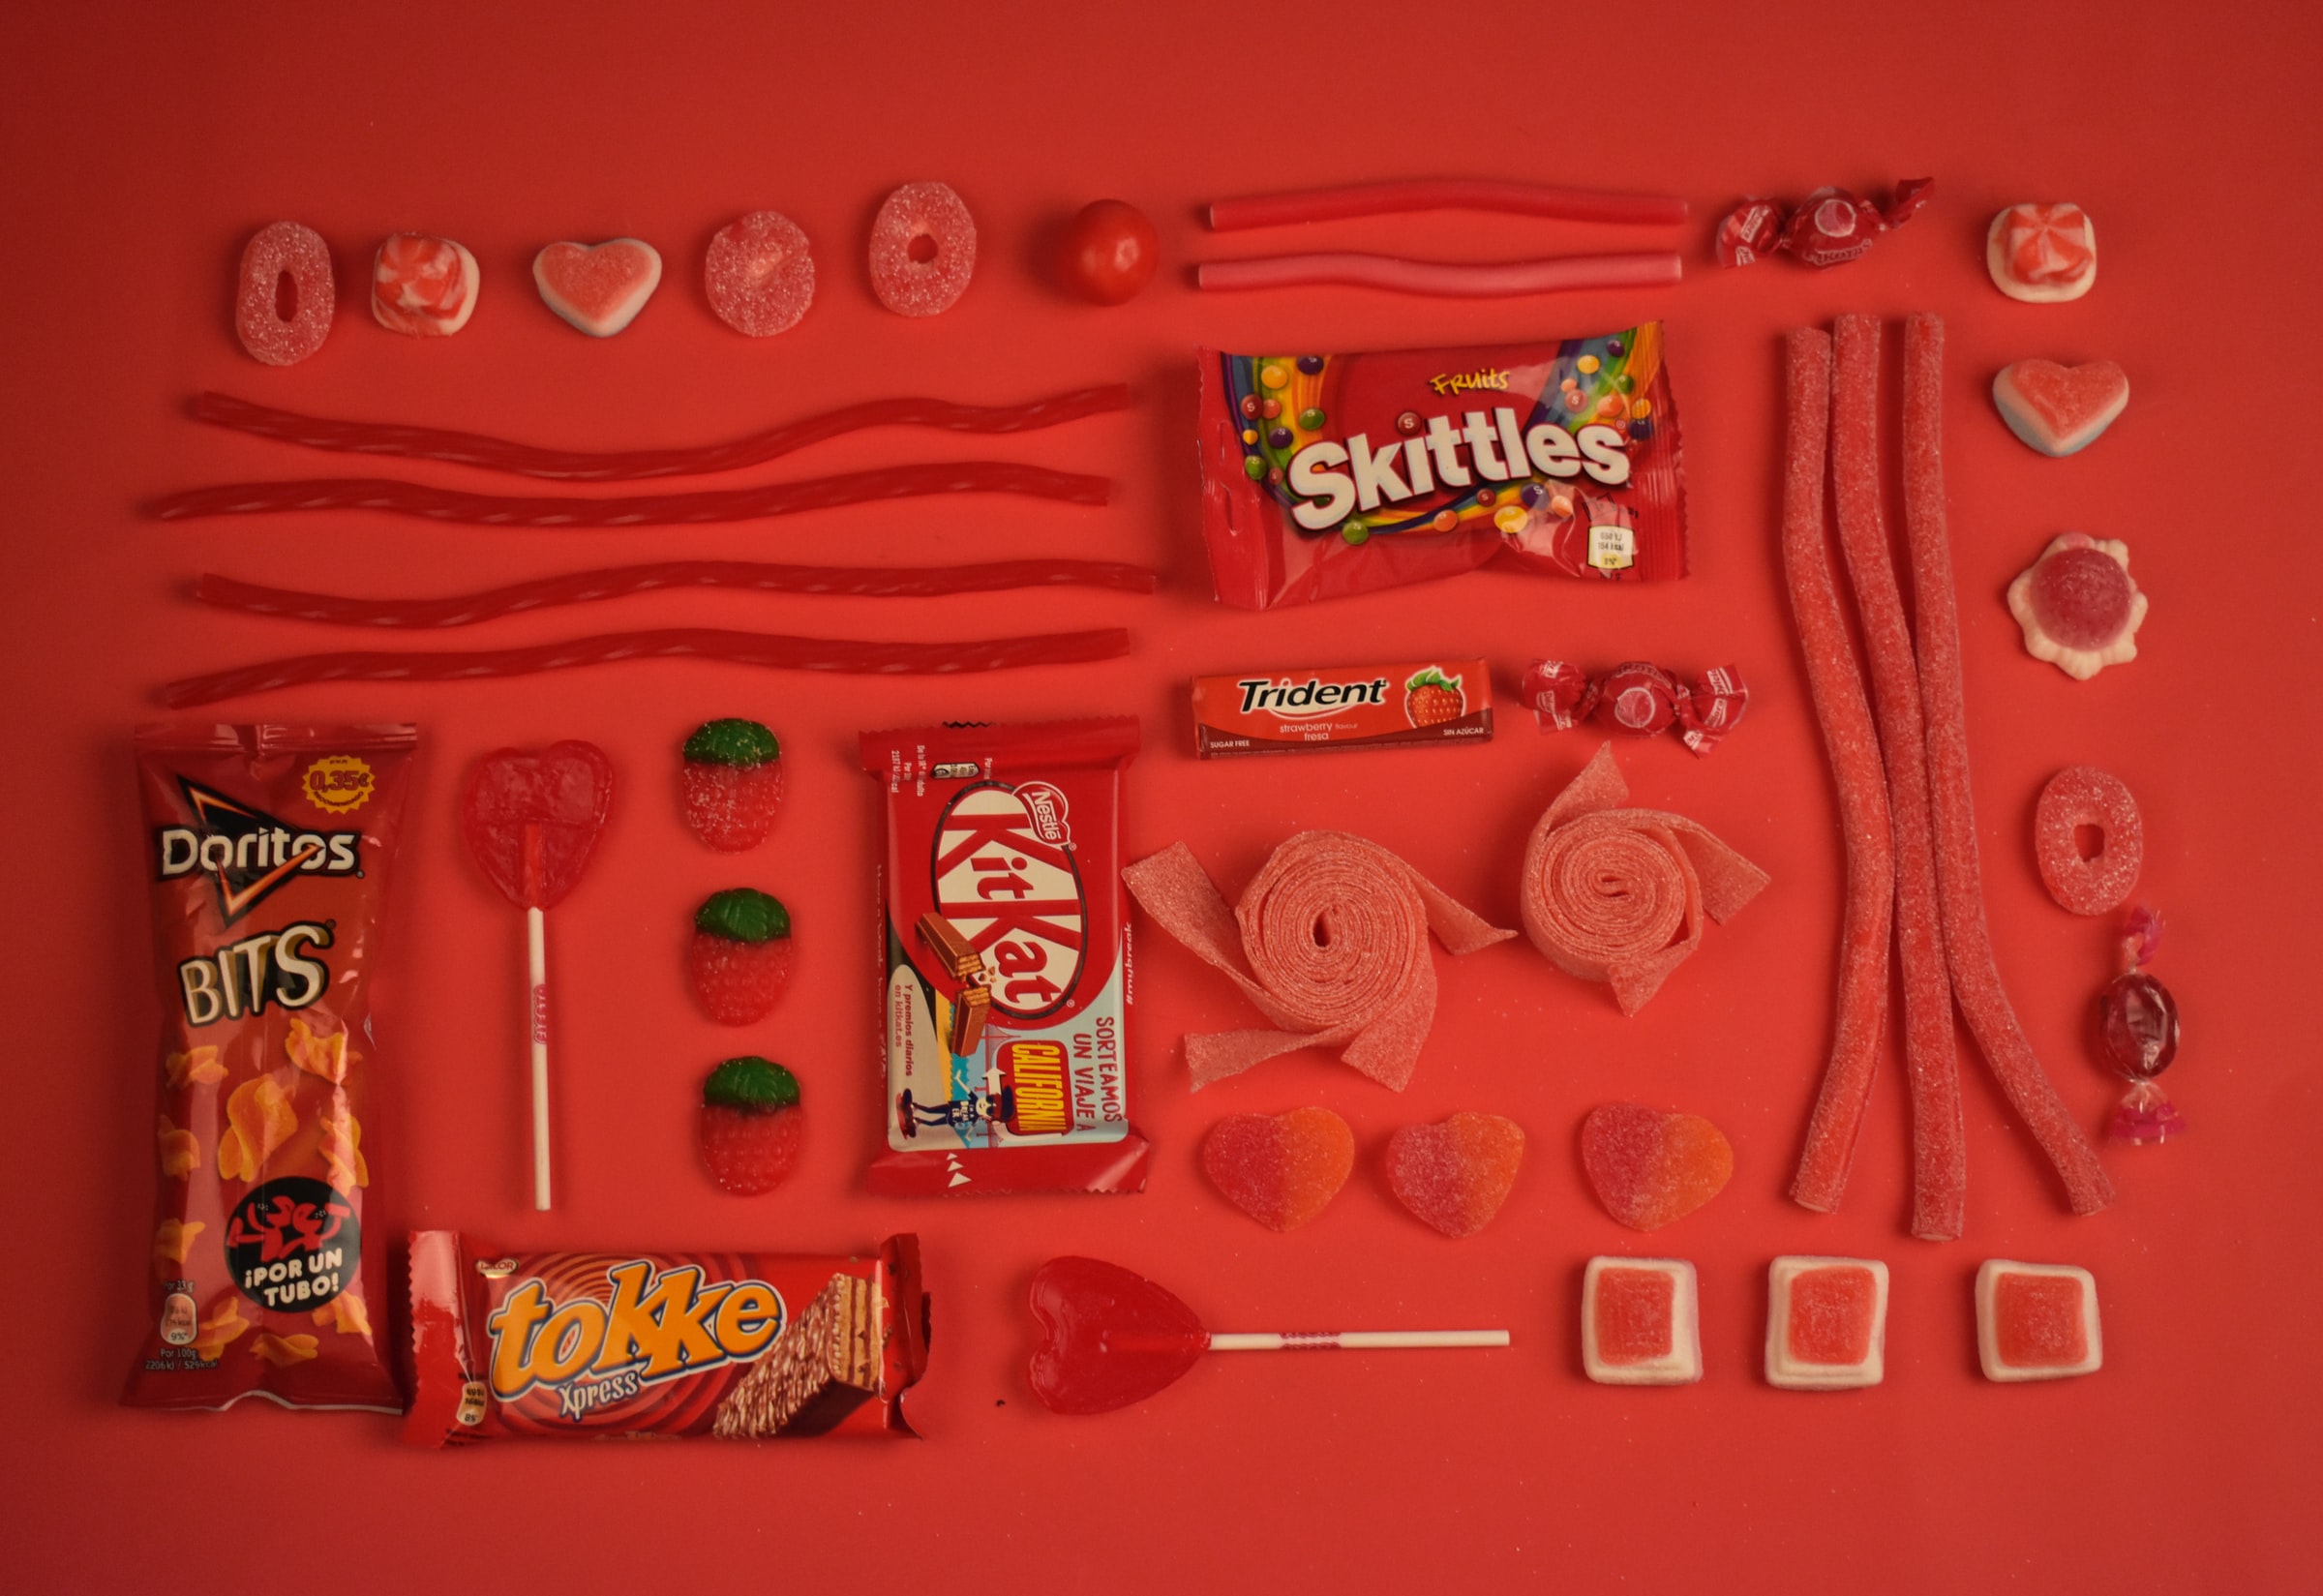 Candies, chocolates and other snacks all with red packaging